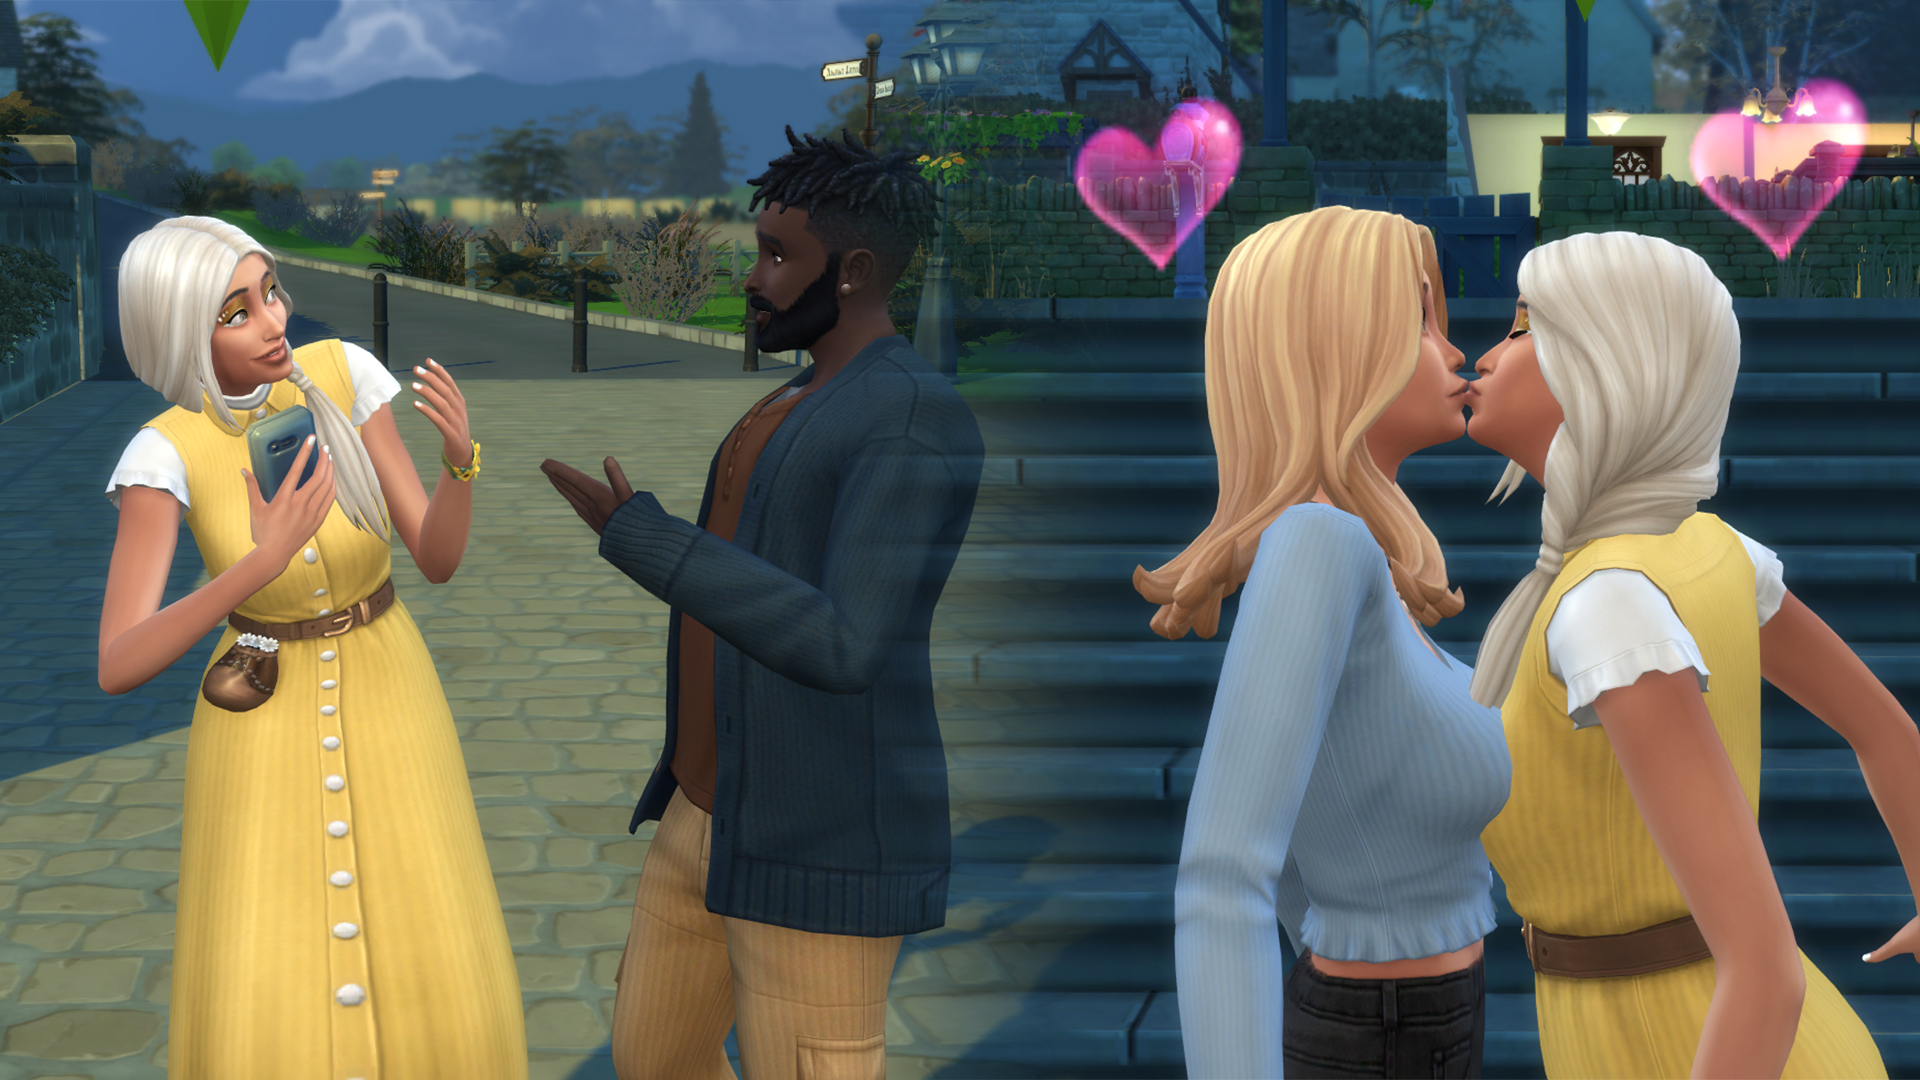 The Sims 4 relationship cheats Max out friendship, romance, pets & more